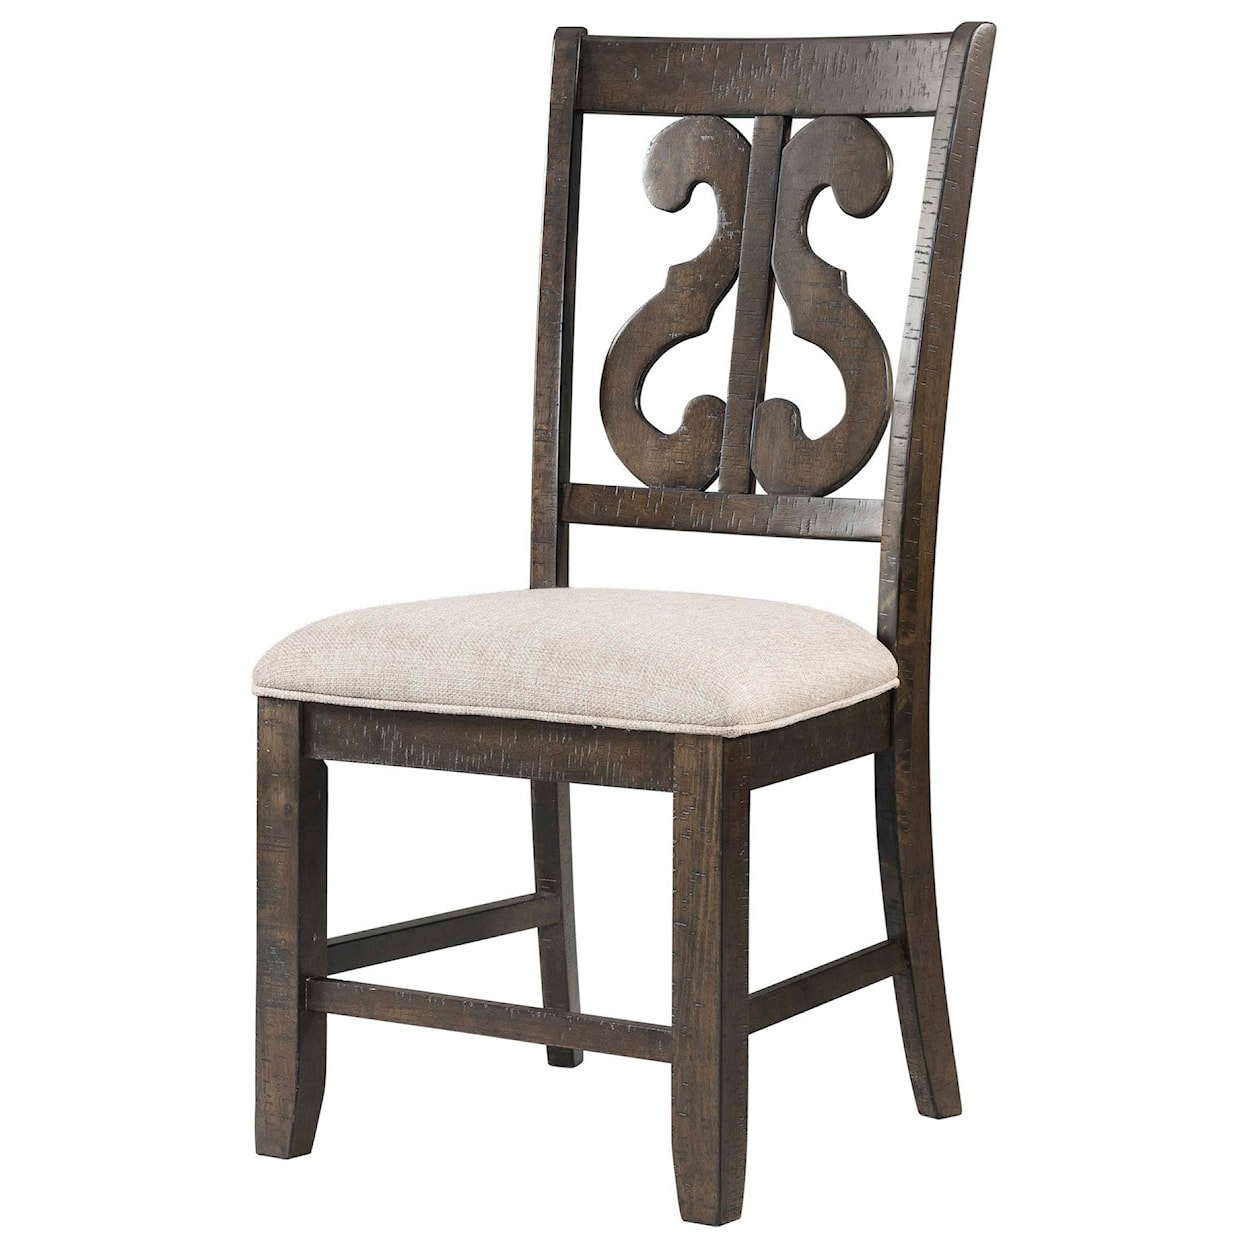 Elements International Stone 7-Piece Dining Table and Chair Set